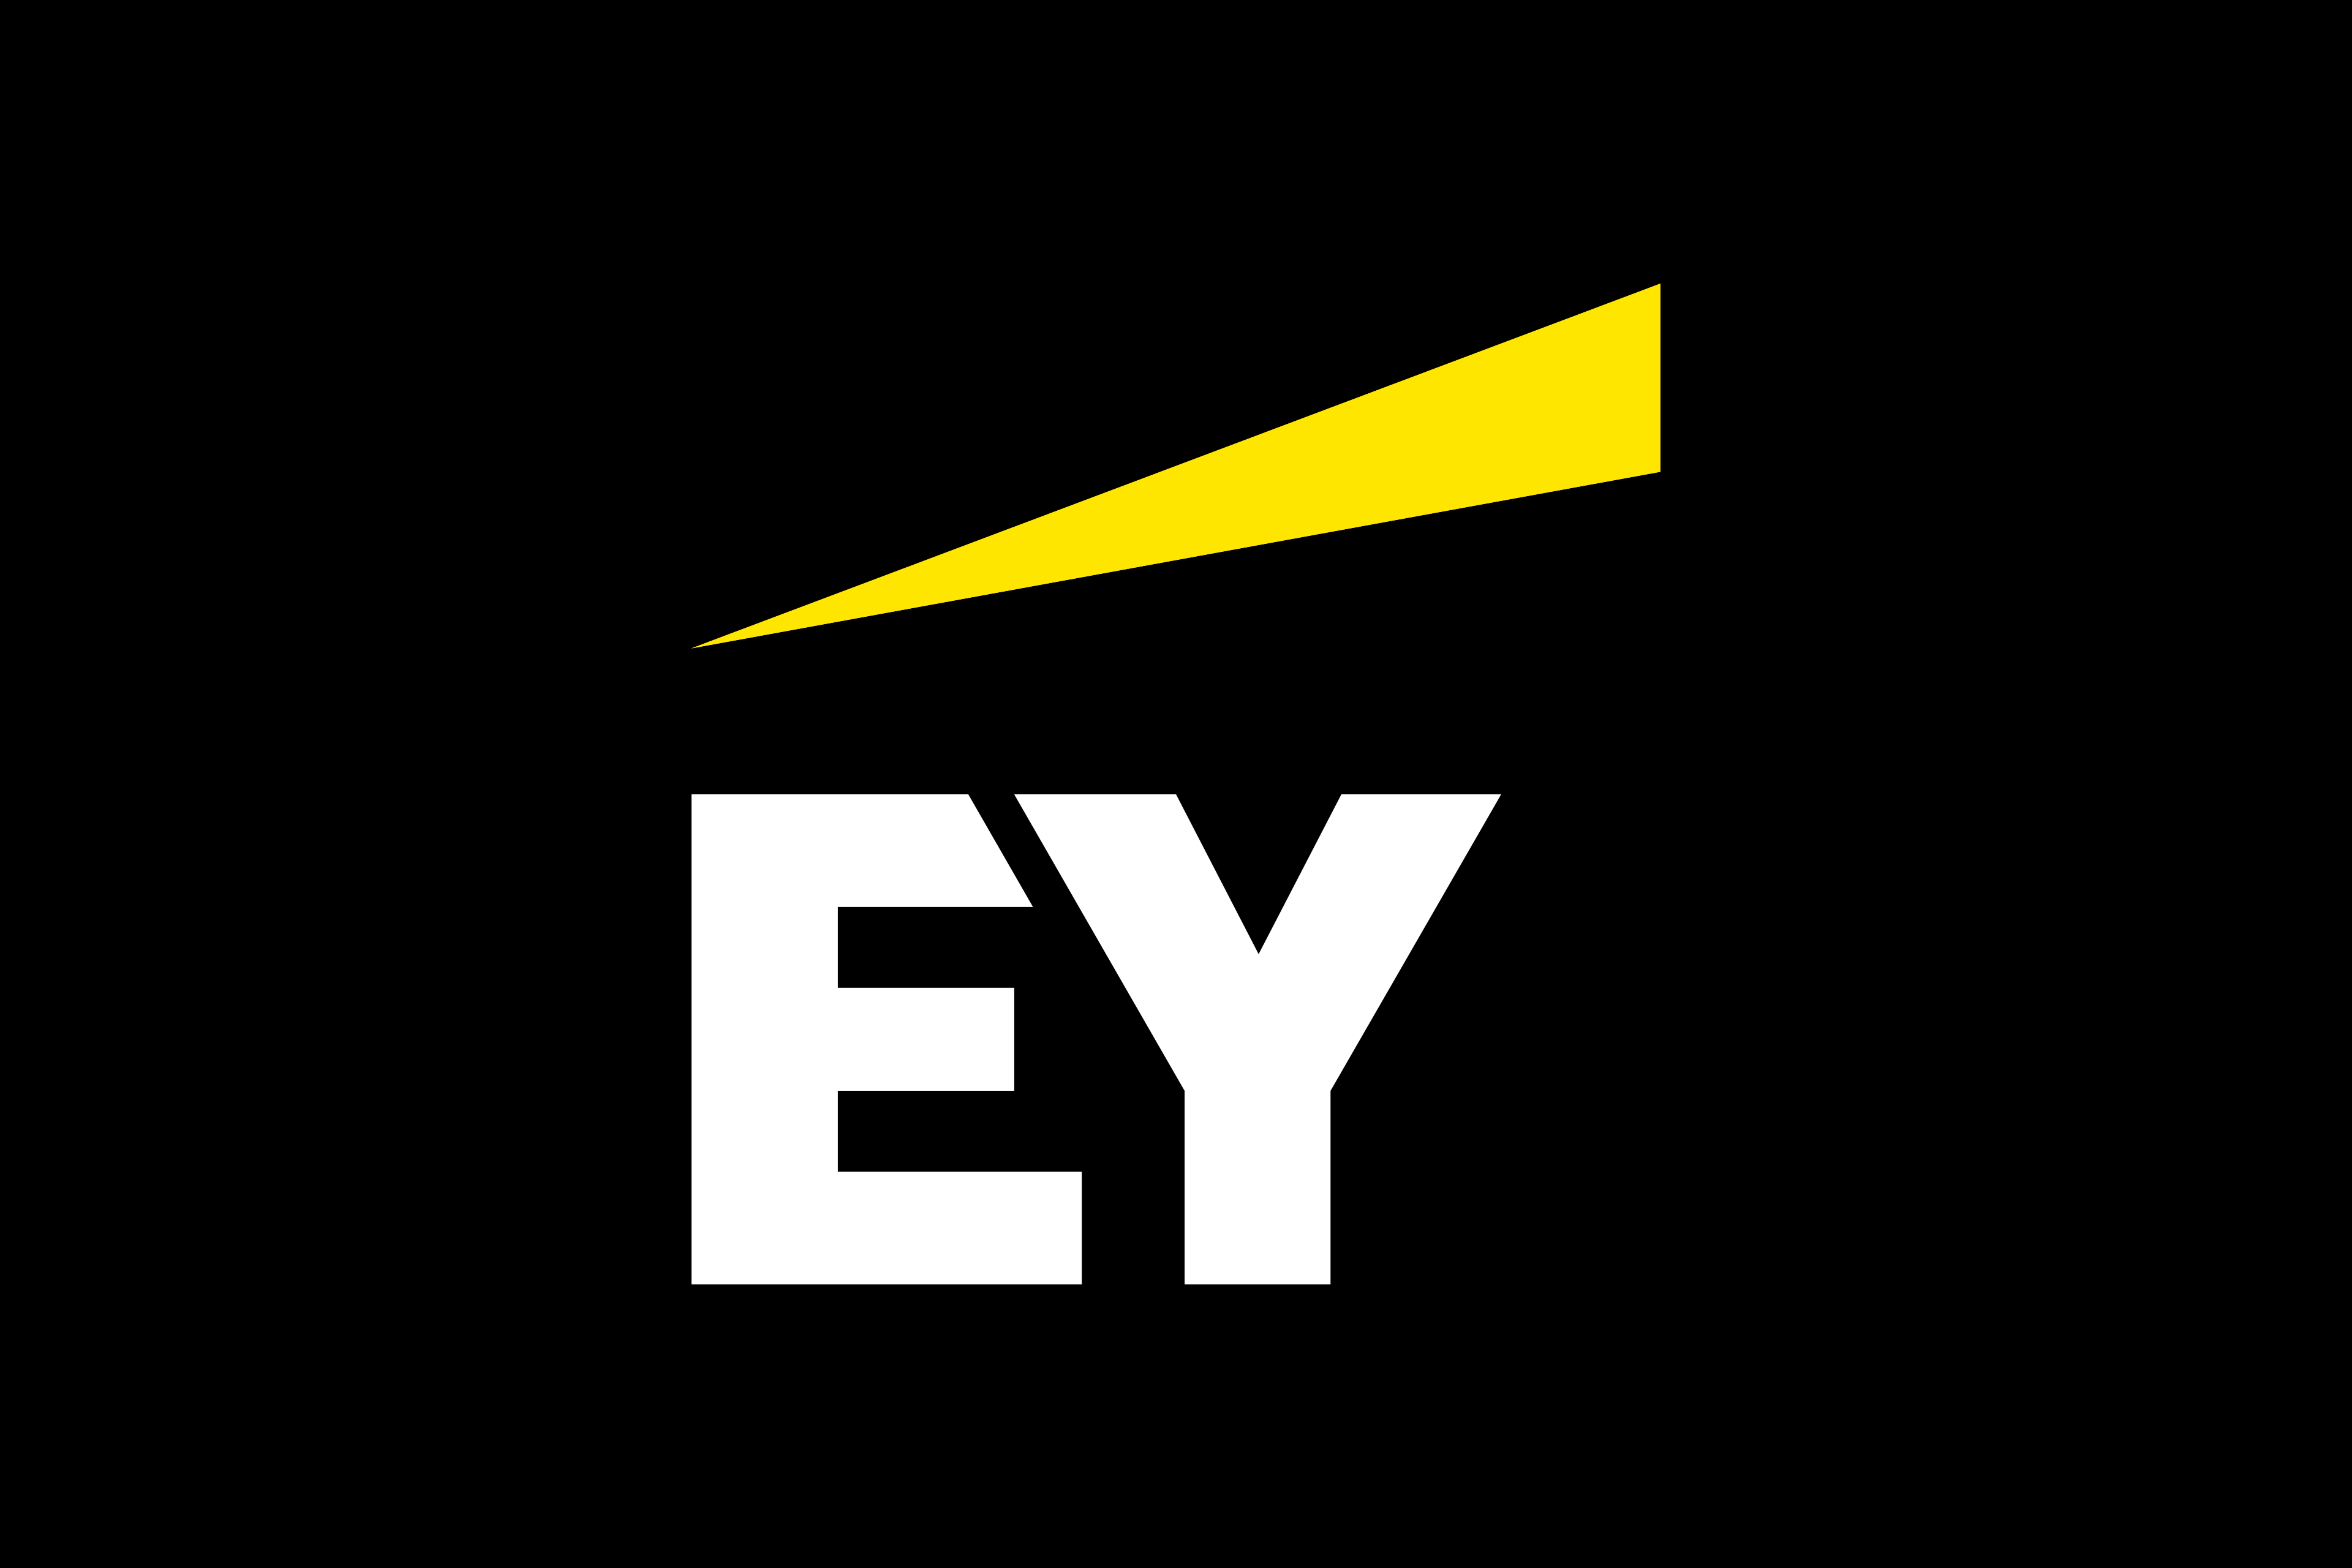 About us | EY - Global